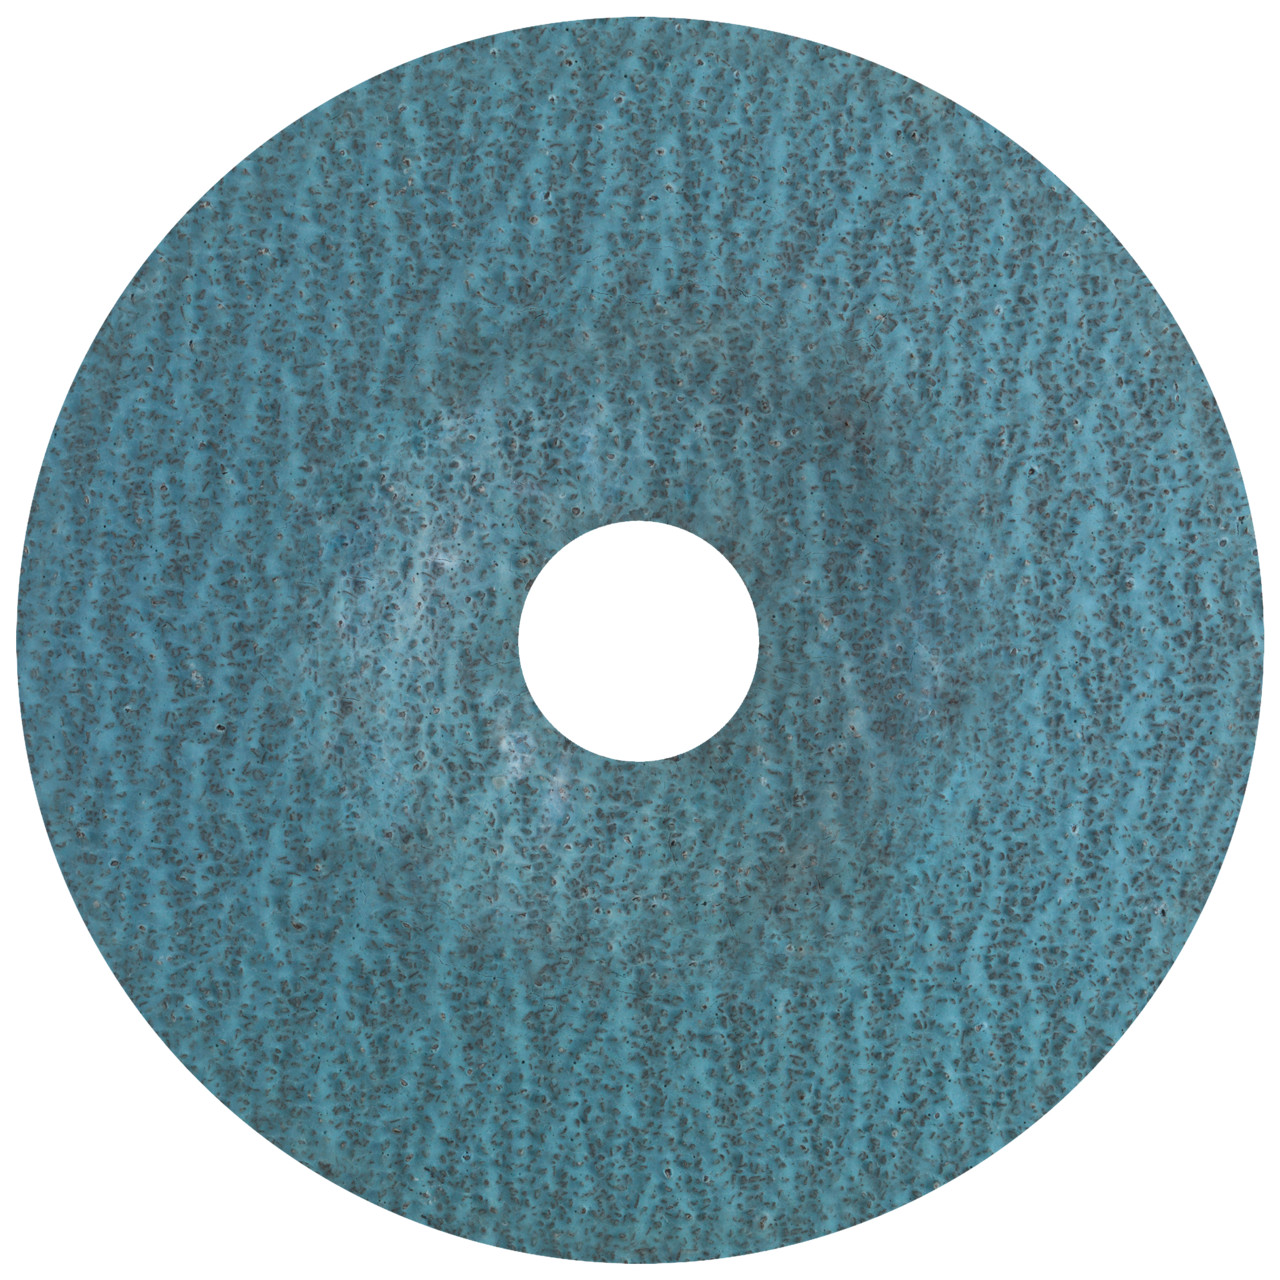 Tyrolit ZA-P48 N NATURAL FIBRE DISC DxH 180x22 For steel and stainless steel, P60, form: DISC, Art. 205060